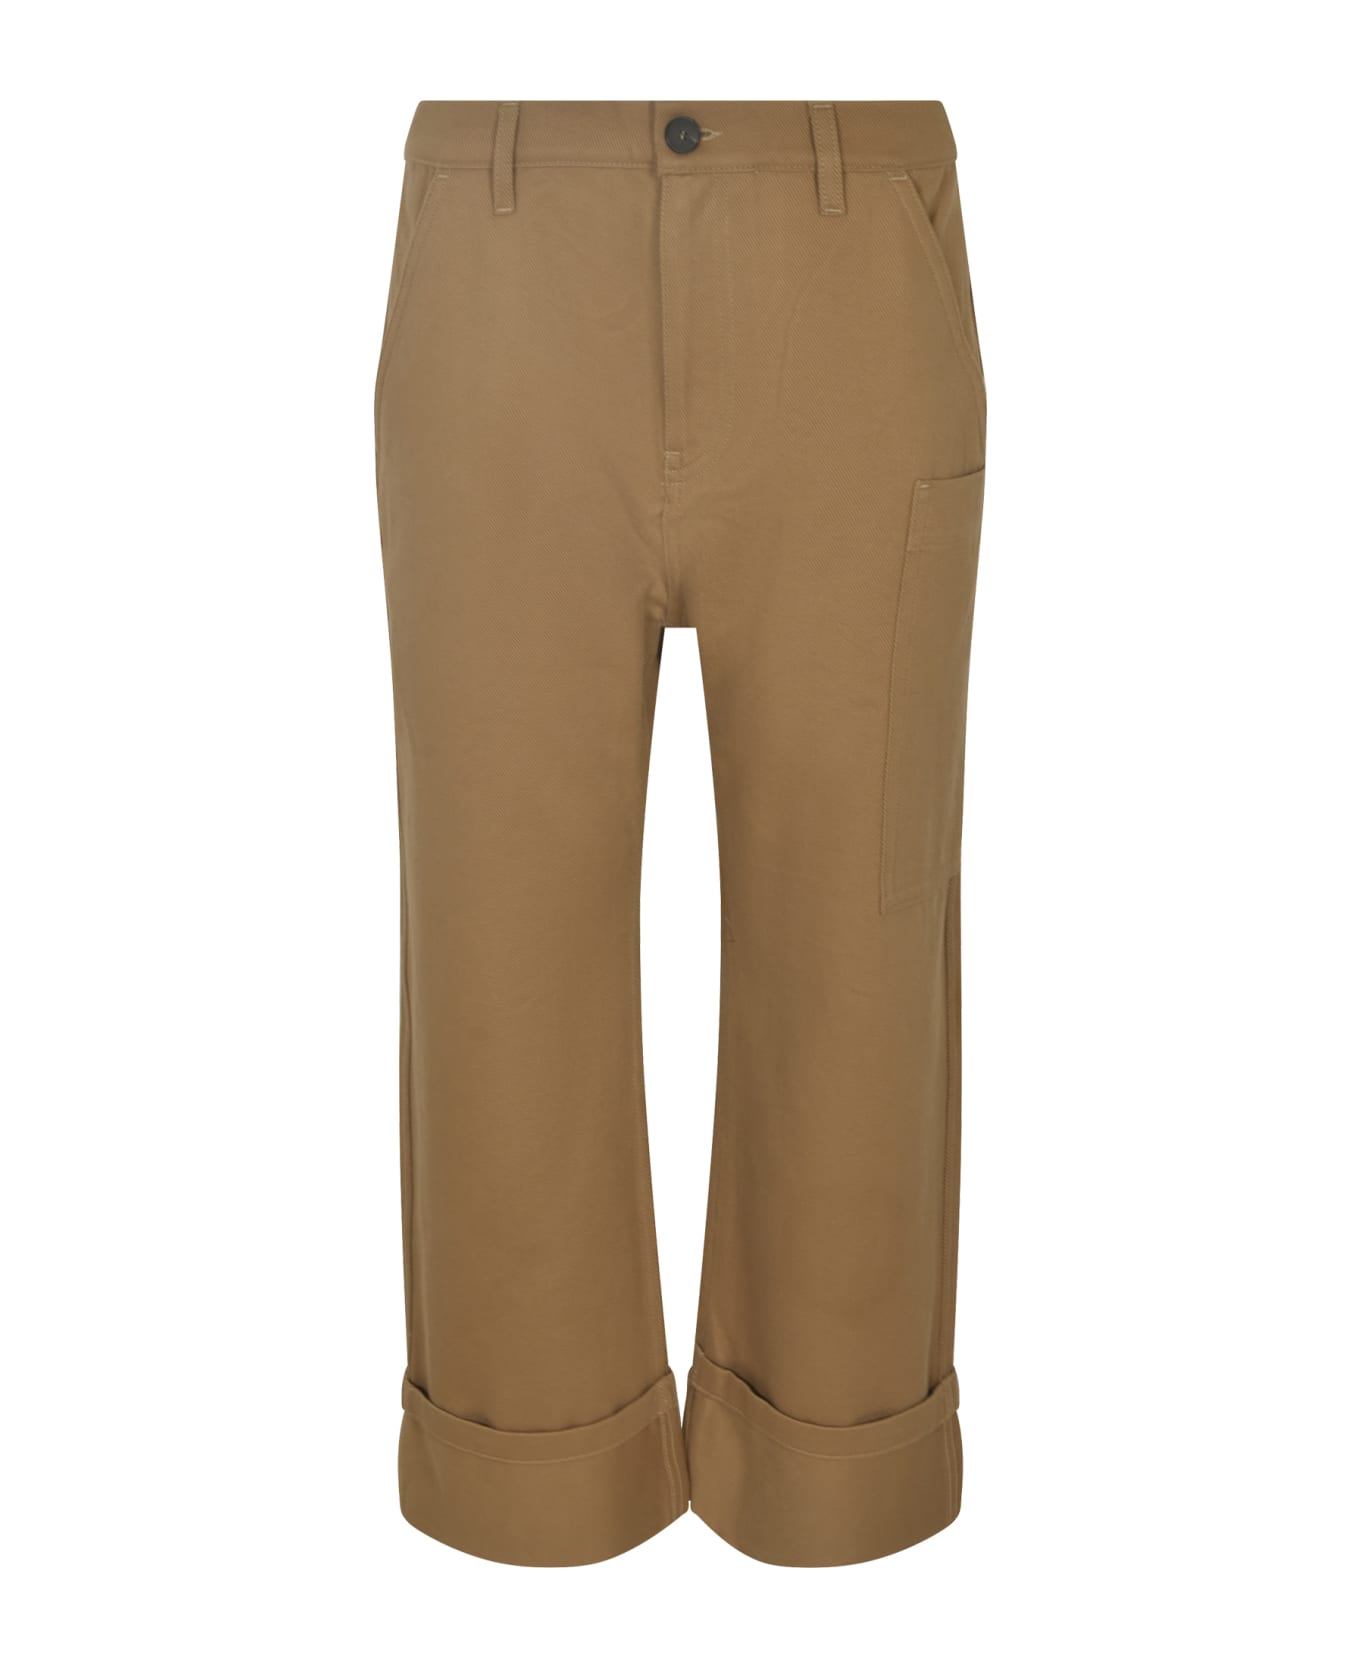 Sofie d'Hoore Straight Buttoned Trousers - Cardboard